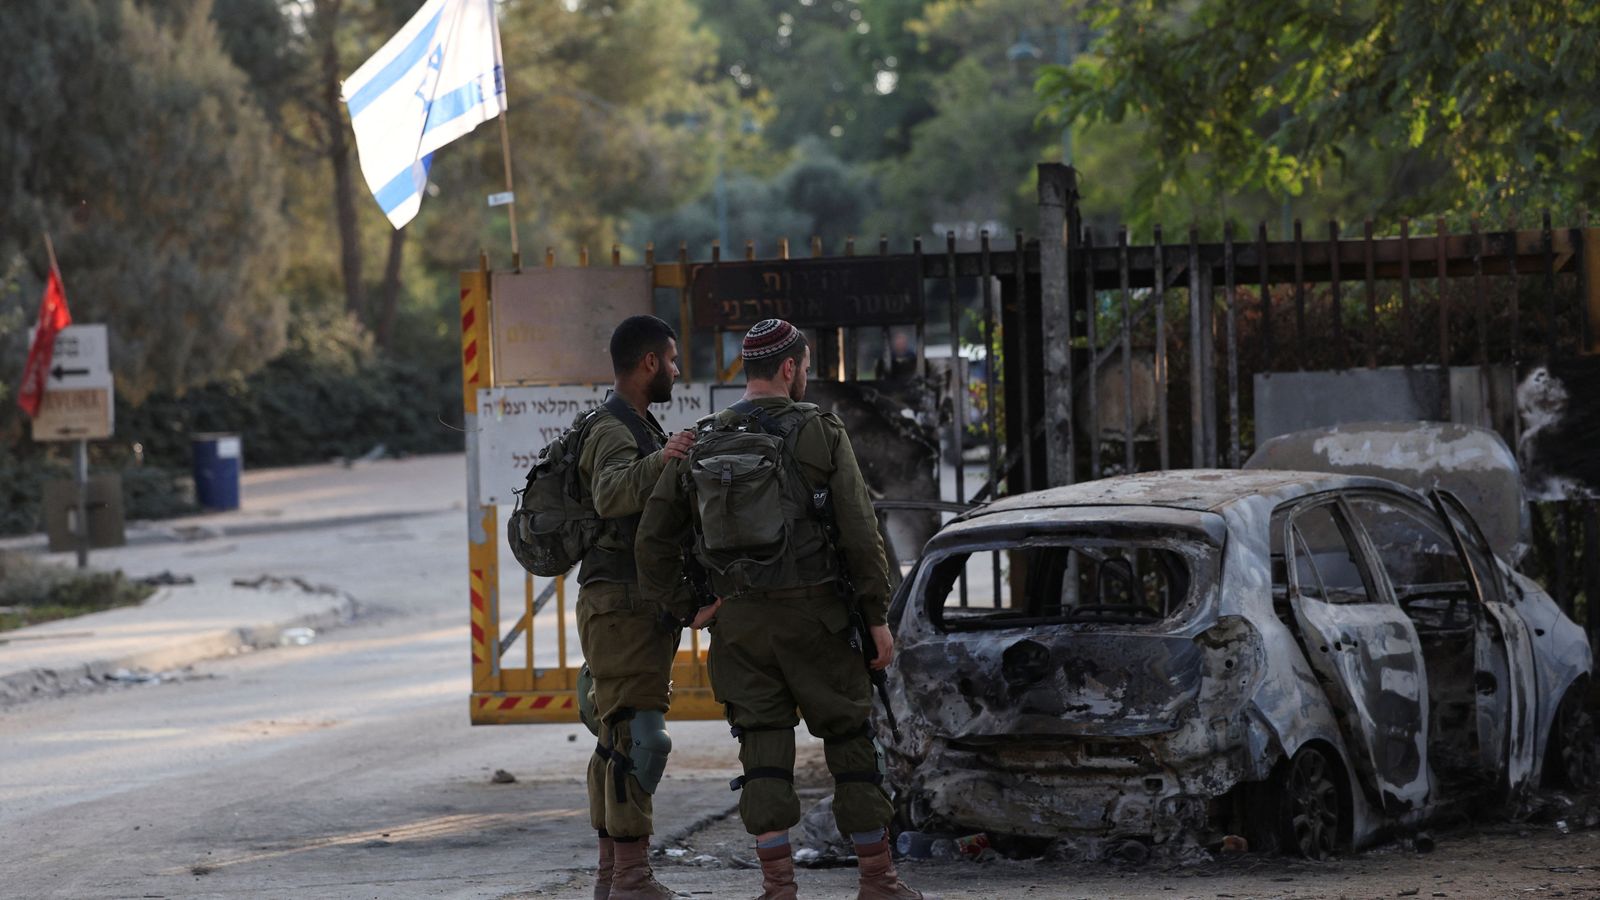 Israel says it has evidence of Iranian 'involvement' in Hamas attack - but 'cannot elaborate'